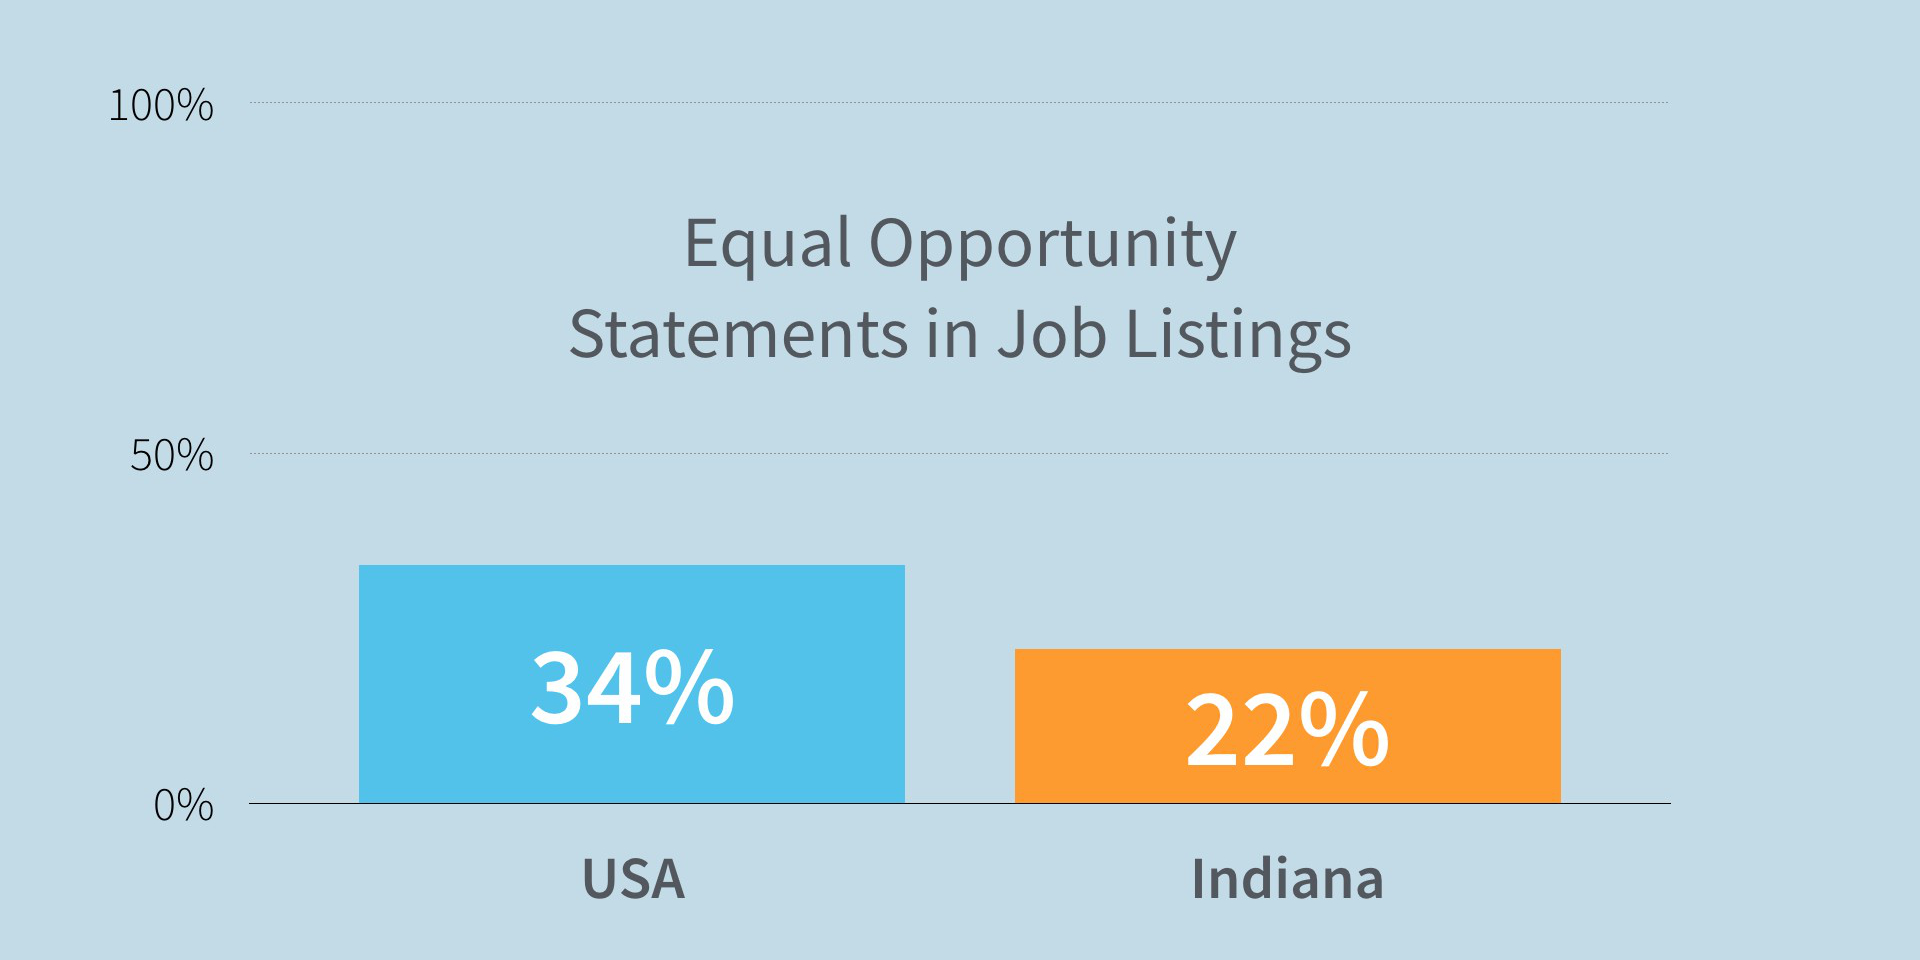 Equal opportunity statements in job listings 34% in USA and 22% in Indiana